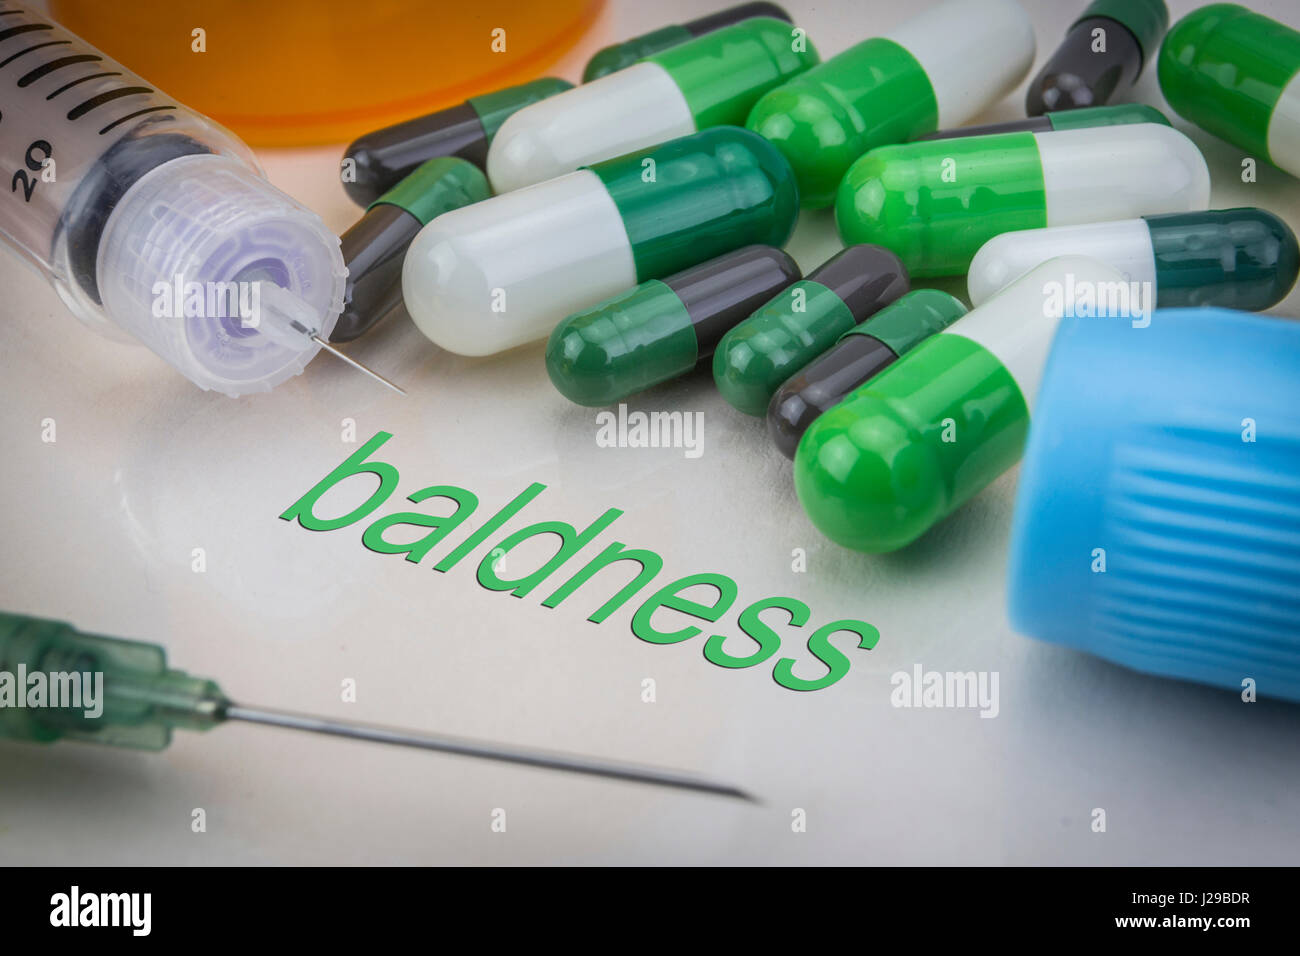 Baldness, medicines and syringes as concept of ordinary treatment health Stock Photo